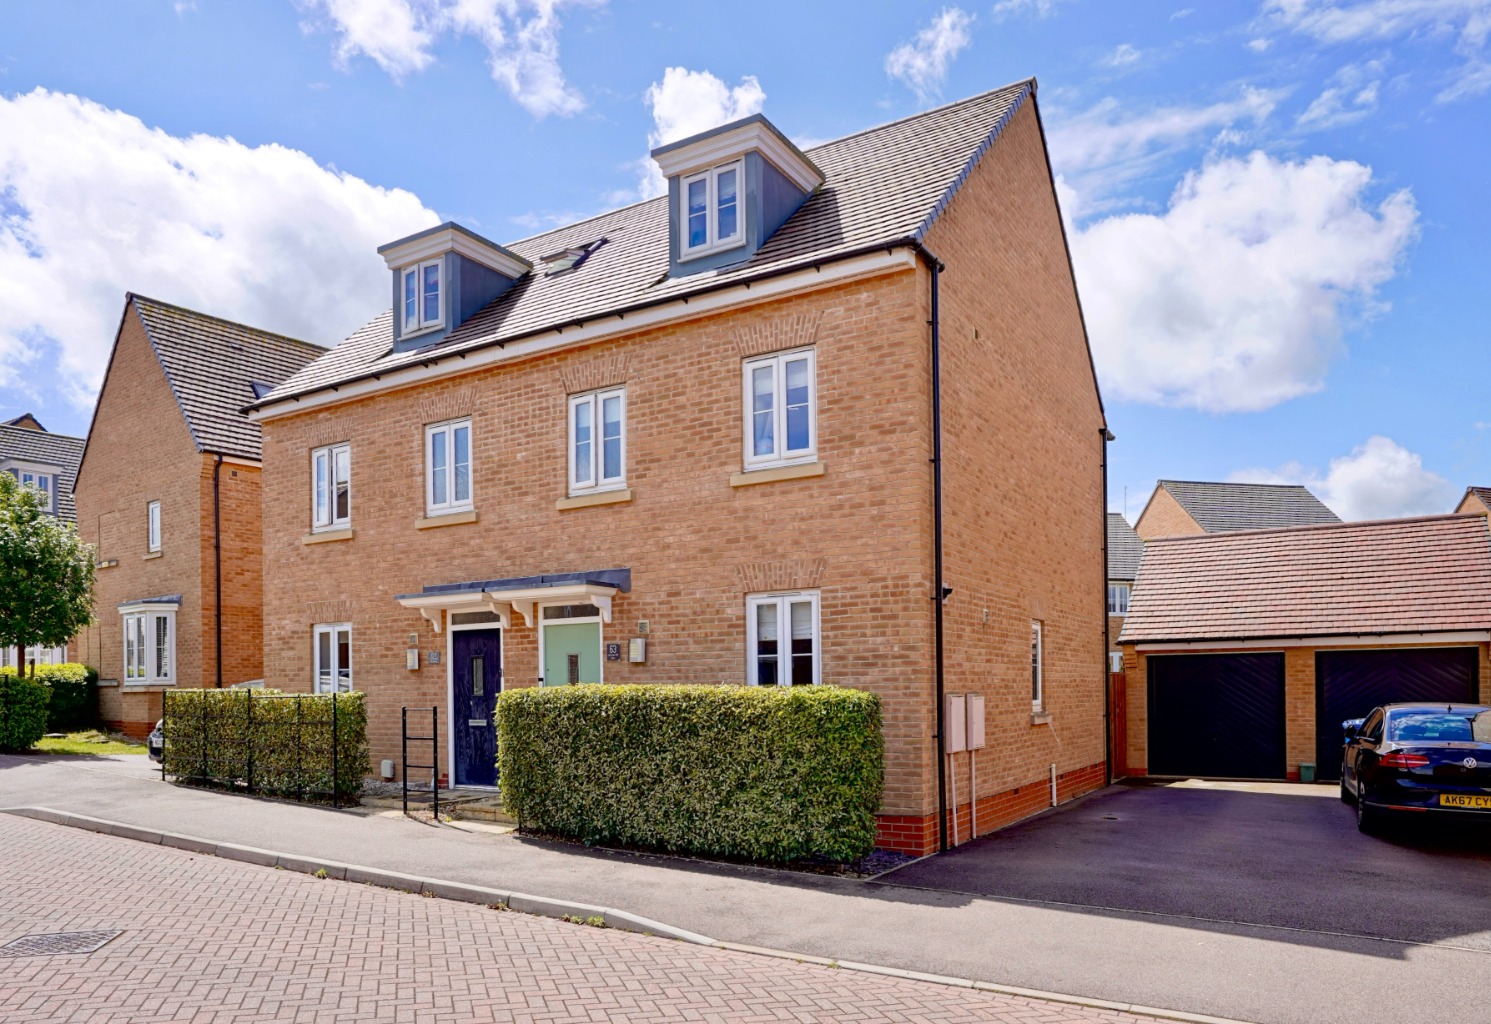 3 bed semi-detached house for sale in Summers Hill Drive, Cambridge - Property Image 1